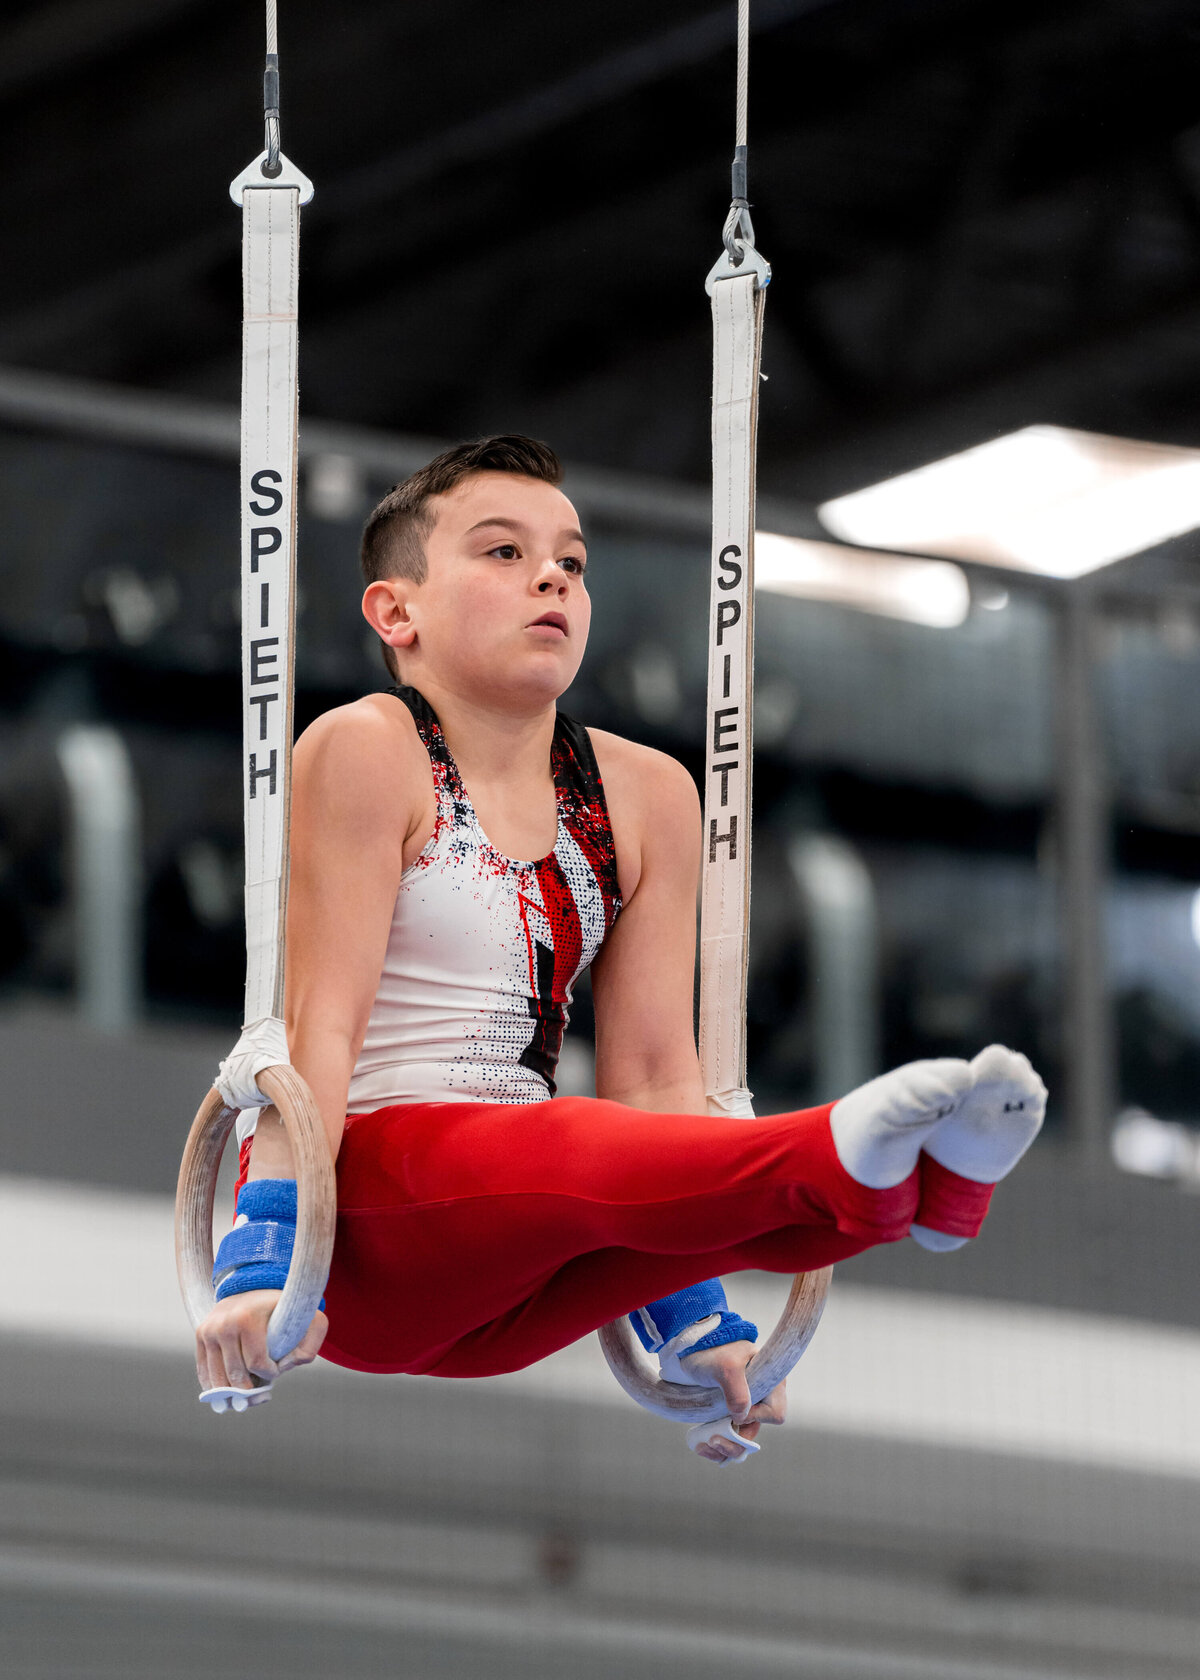 Photo by Luke O'Geil taken at the 2023 inaugural Grizzly Classic men's artistic gymnastics competitionA1_00413